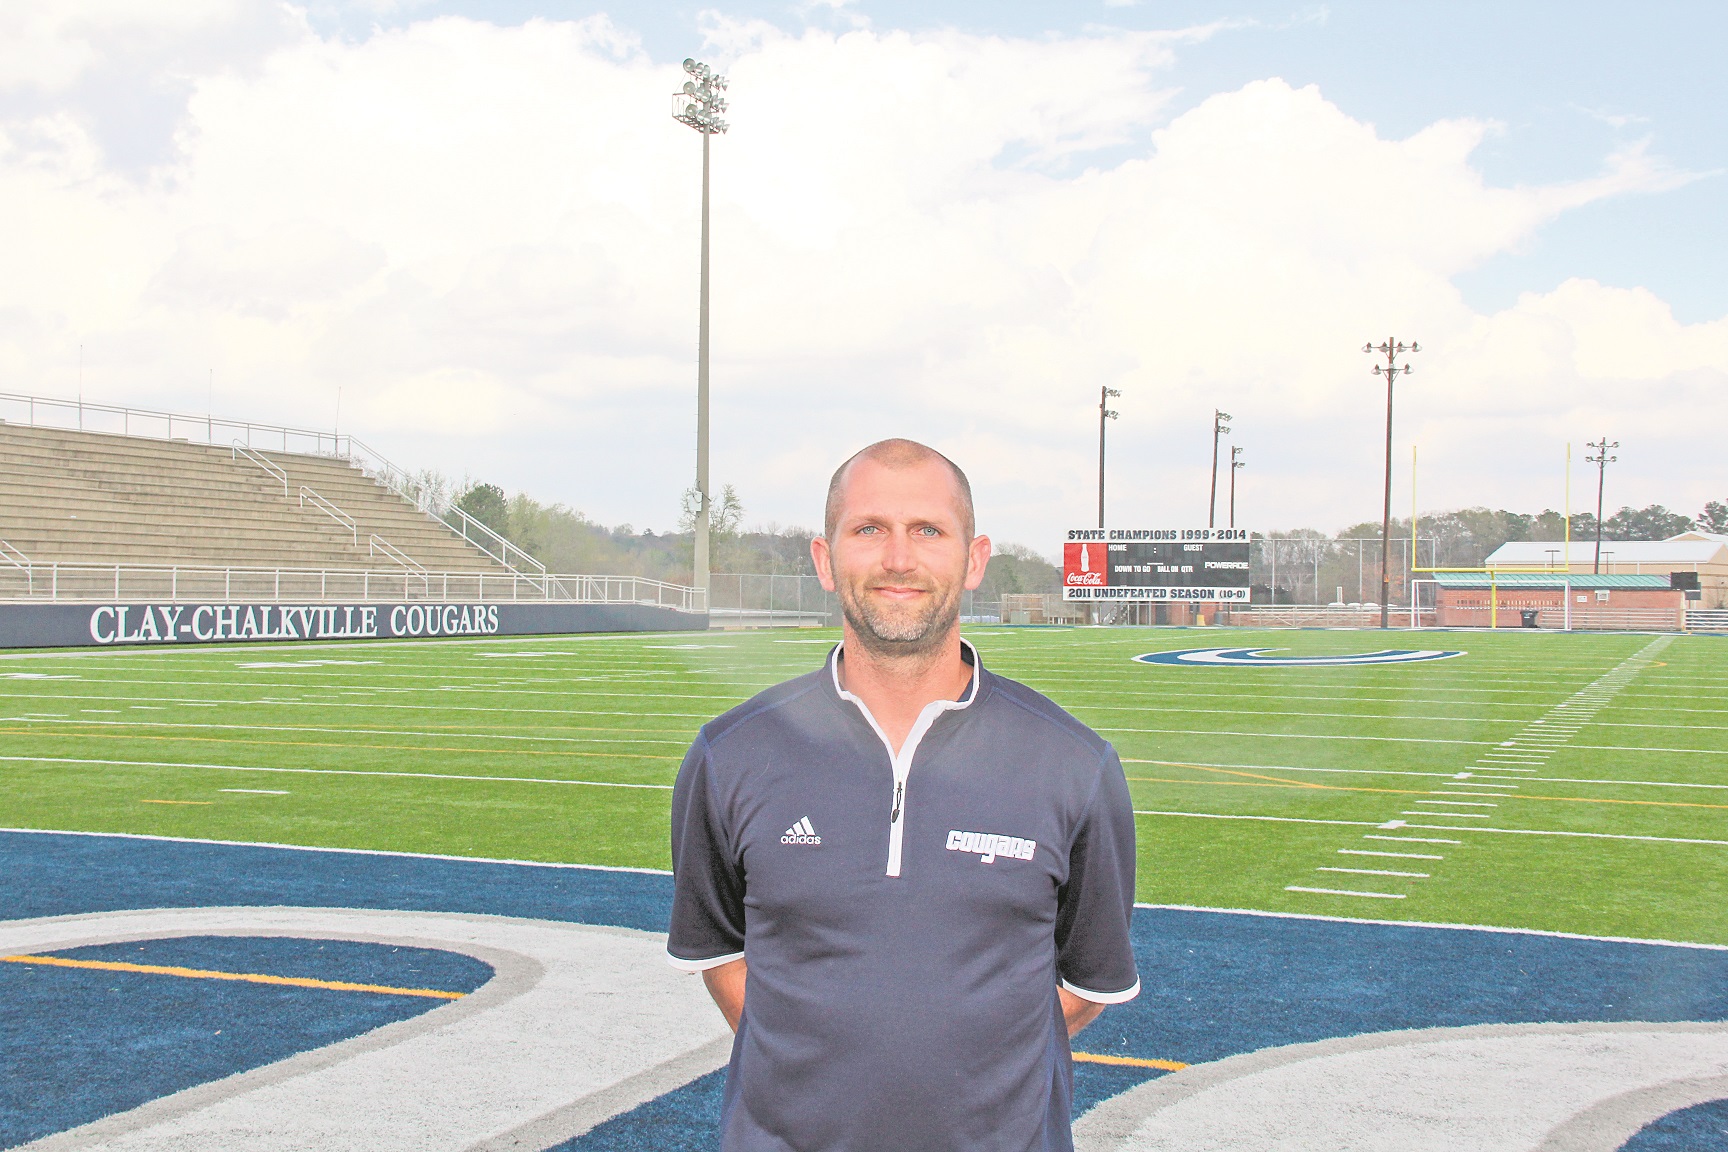 Unconcerned with rankings, Clay-Chalkville is focused on what's next